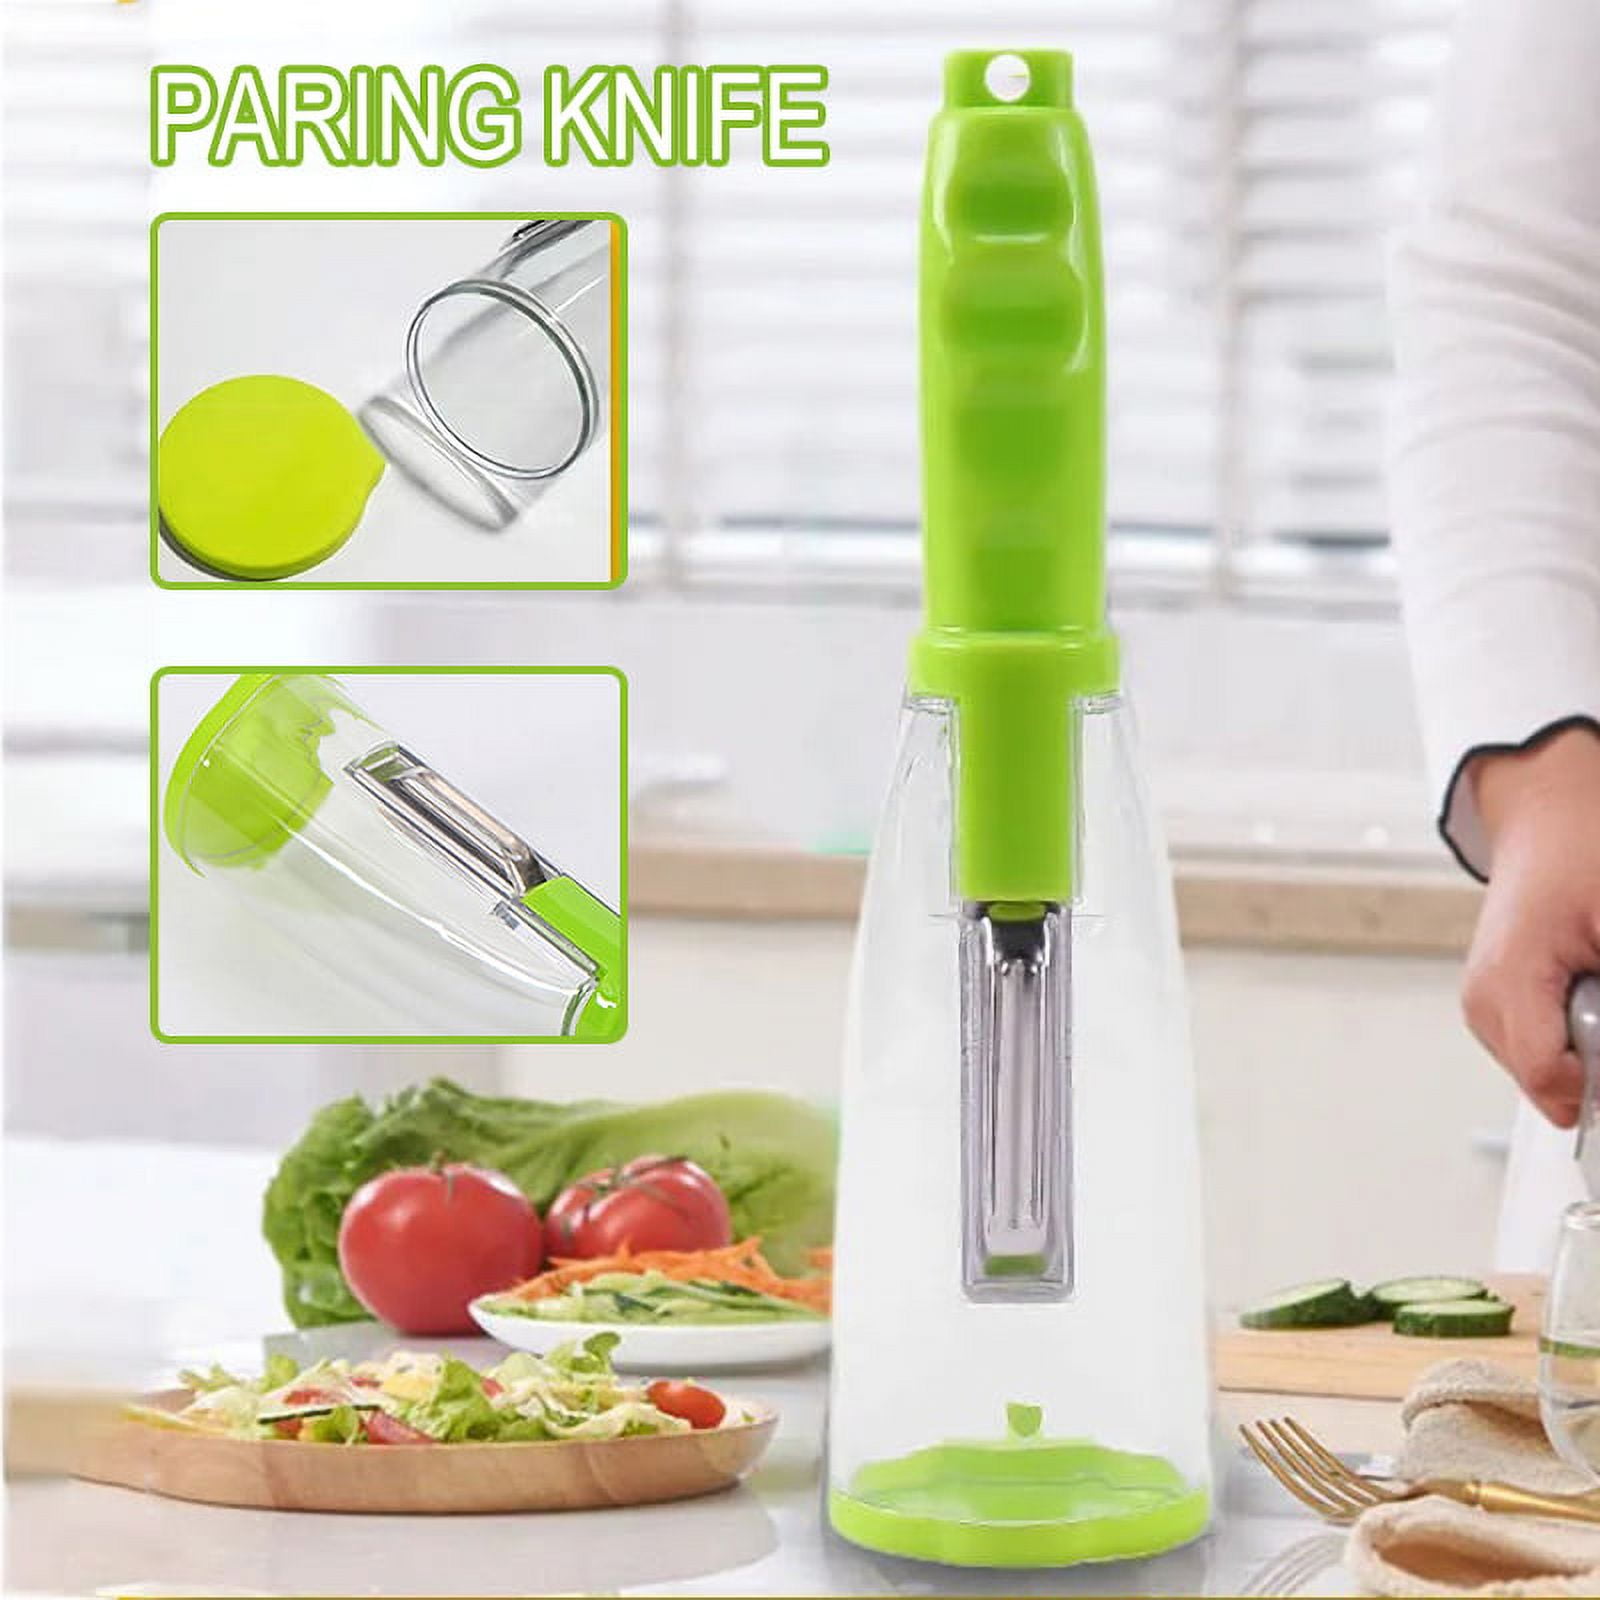 Stainless Steel Fruit & Vegetable Peeler for you kitchen needs.